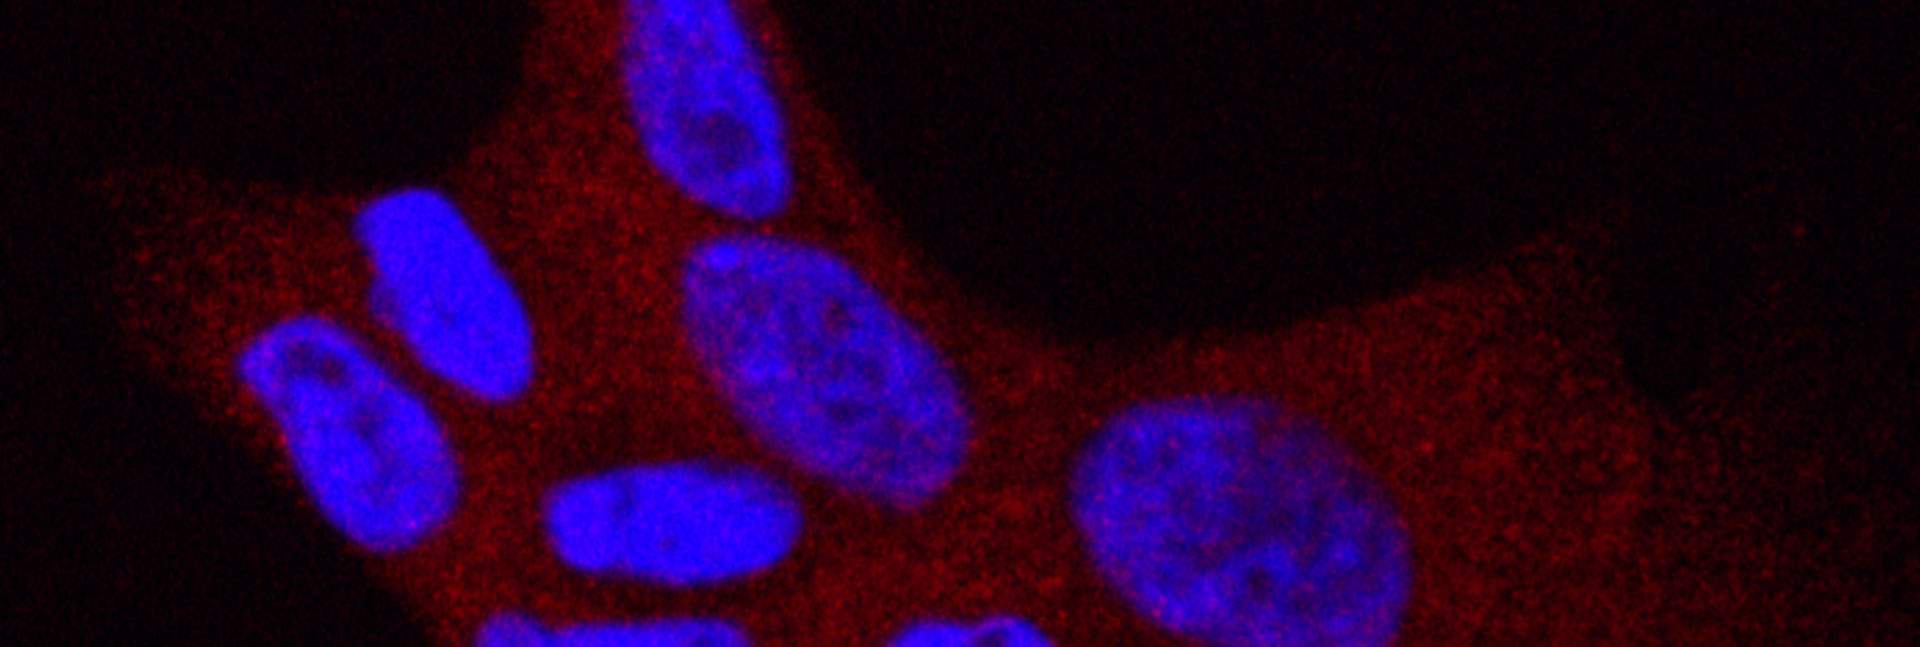 Human lung cancer cells harboring the L858R mutation in the EGFR gene. Cell nuclei are in blue. The red color marks a protein that is present in the cell cytoplasm when the EGFR is active and driving the uncontrolled cell divisions